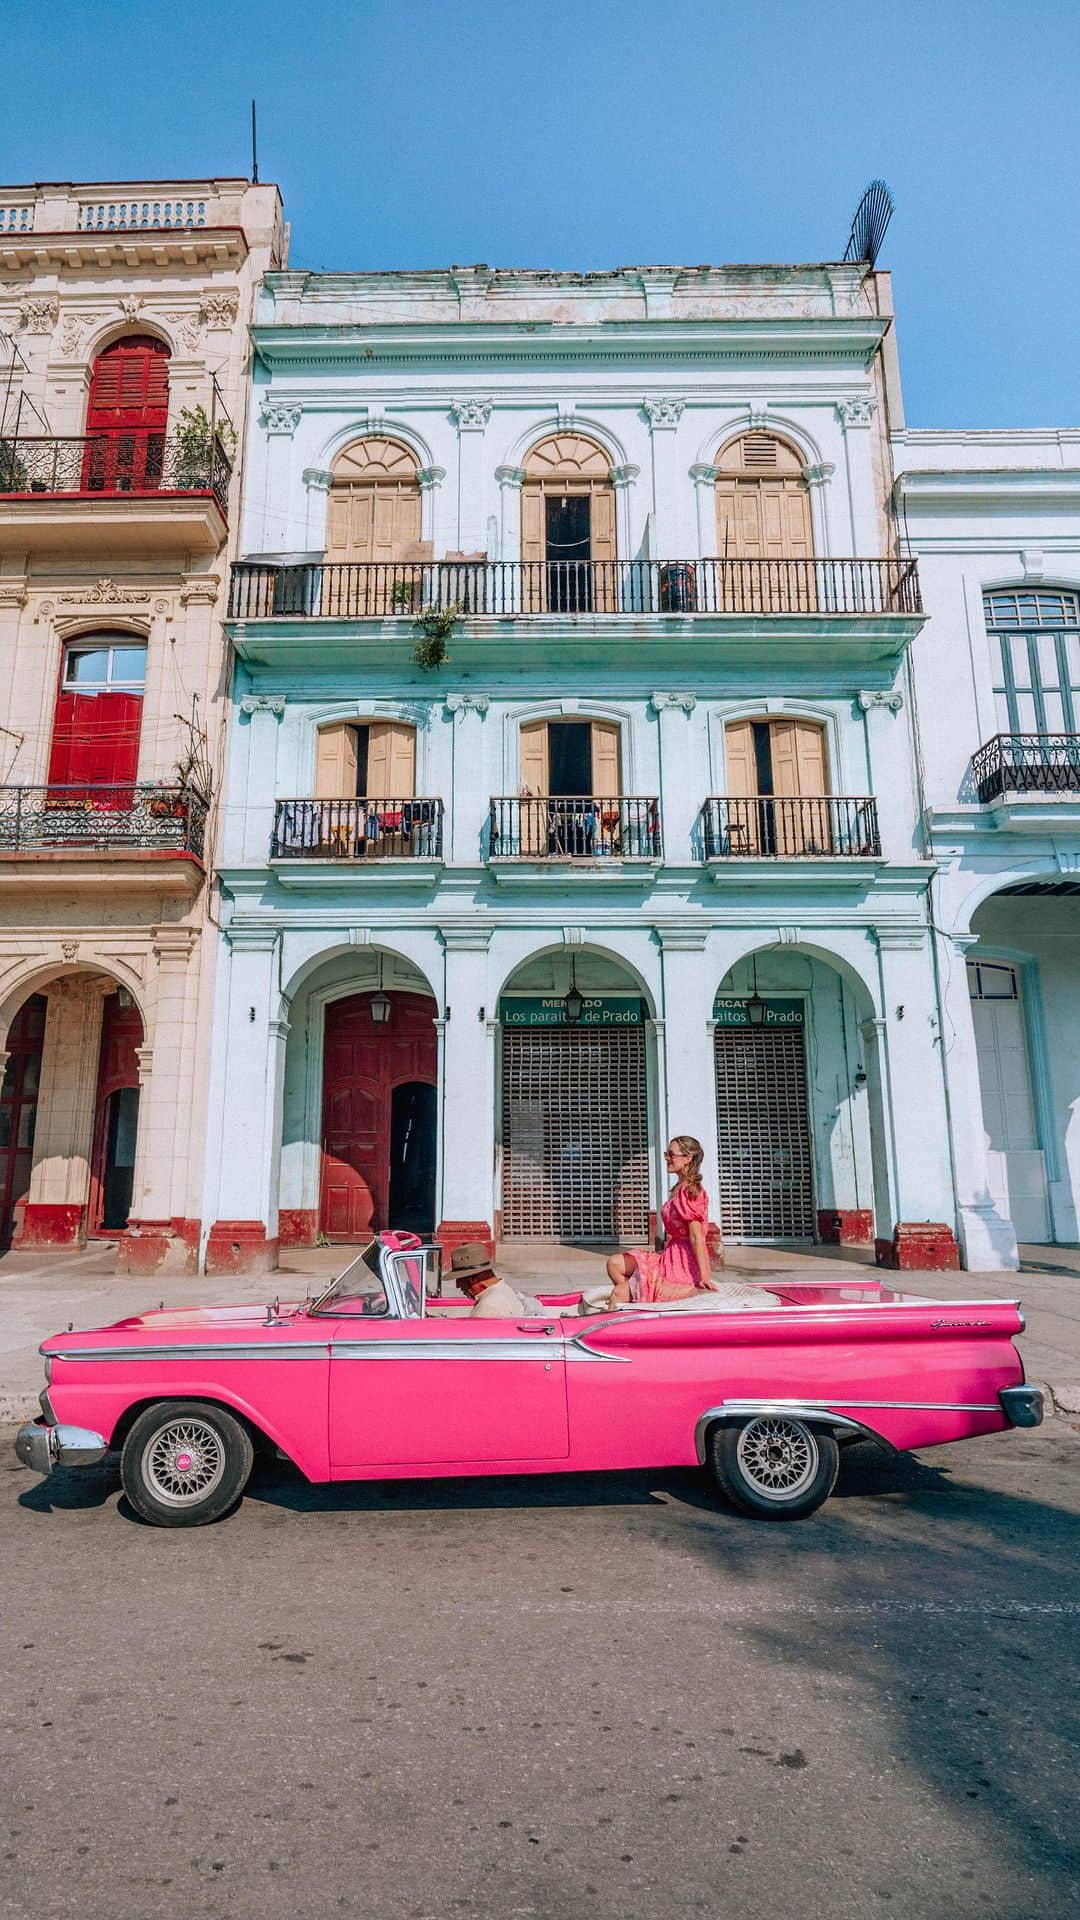 Izkizのインスタグラム：「Exploring beautiful Cuba 😍 Here is a rough guide to our Itinerary 👇🏻  🇨🇺 Havana, we spent a couple of days exploring the beautiful city of Havana where we ate at well known restaurants such as La Bodeguita Del Medio, had drinks on the rooftop of the Kempinski Hotel overlooking the Capitol and the Great Theatre of Havana, watched the famous Tropicana Show which has been going since 1939, walked the streets until our feet hurt and took a ride in a hot pink convertible classic car! 🚗   🇨🇺 Santiago De Cuba, a 1 hour flight from Havana. We spent a few days exploring the bustling town of Santiago de Cuba and nearby places such as La Gran Piedra, the Cobre Basilica and El Morro castle before going on a bus ride to Baracoa stopping off at the most Wastern point in Cuba called Maisi ⛪️   🇨🇺 Baracoa, the oldest city and one of the most charming in Cuba. Located in the Guantanamo province, this Cuban jewel is hidden among mountain ranges and beautiful beaches. We visited black beaches, chocolate farms and cruised down the river in Yumuri Canyon 🚣‍♂️  One very bumpy bus ride later we arrived at the gorgeous…  🇨🇺 Cayo Saetia, here we spent the day swimming, eating, riding horses and relaxing in the stunning nature and the most turquoise sea. We then had a sunset cruise on a catamaran towards Holguin with lots of music and drinks 🍹   All in all such a memorable and eye opening trip. Learnt a lot, met some great people and made memories for life! ❤️  #havana #cuba」